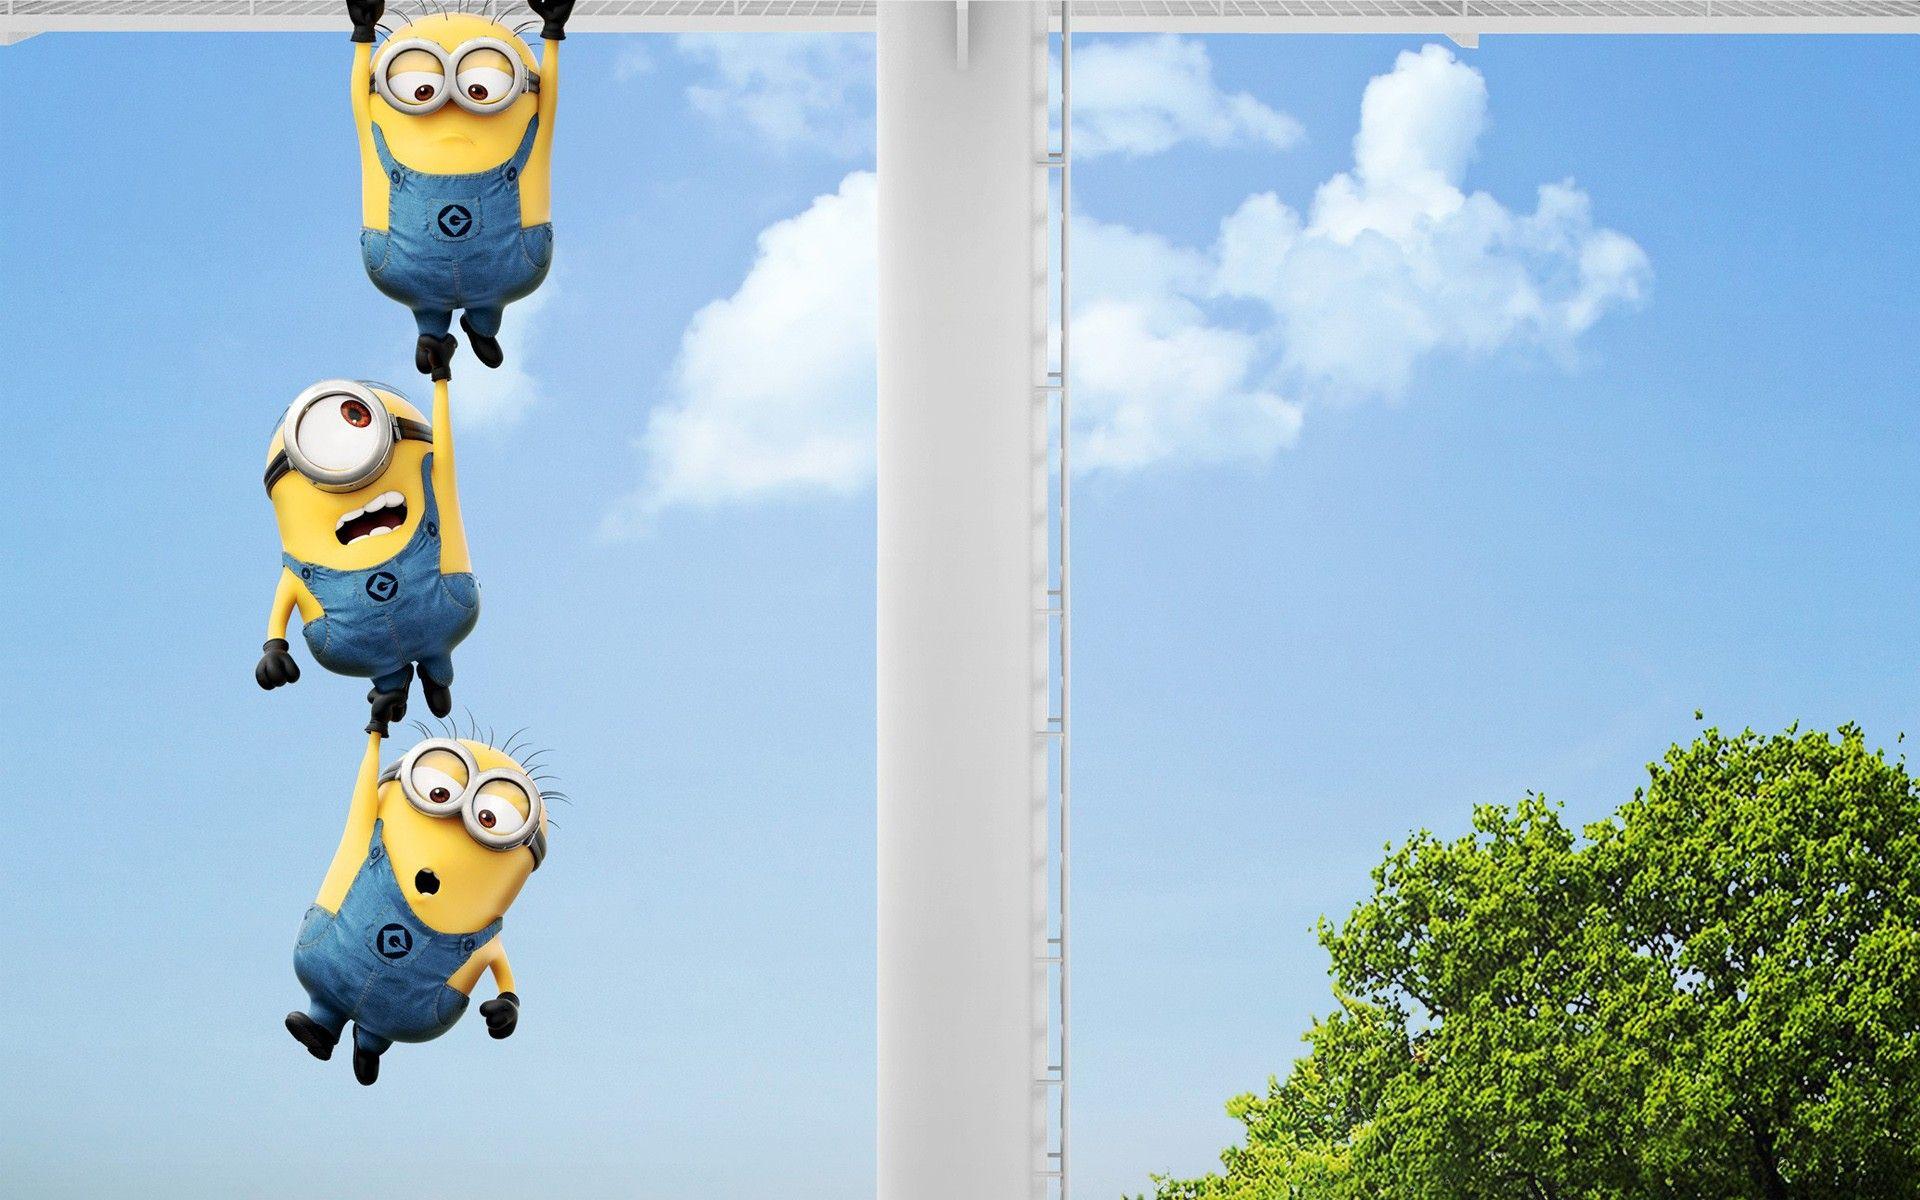 Despicable me 2 Minions background wallpaper download